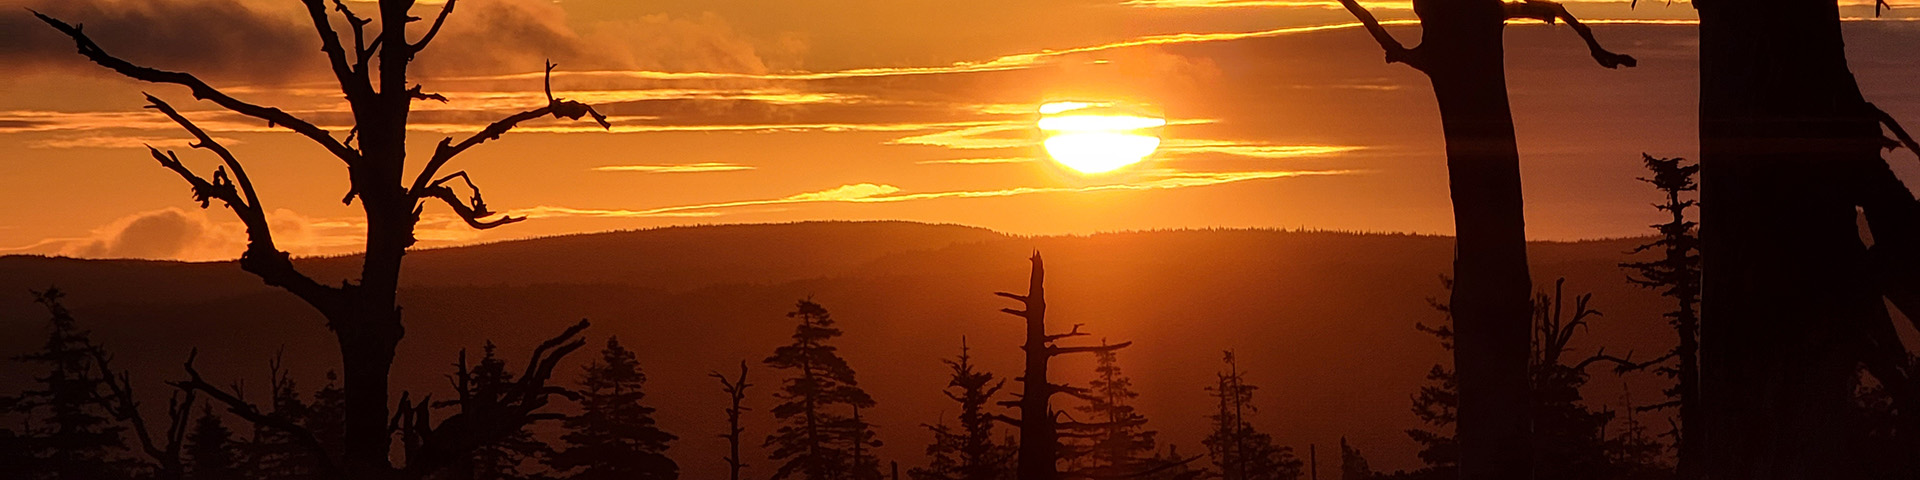 A bright orange sun sets just above the silhouette of a mountain range with softwood and hardwood trees in the foreground